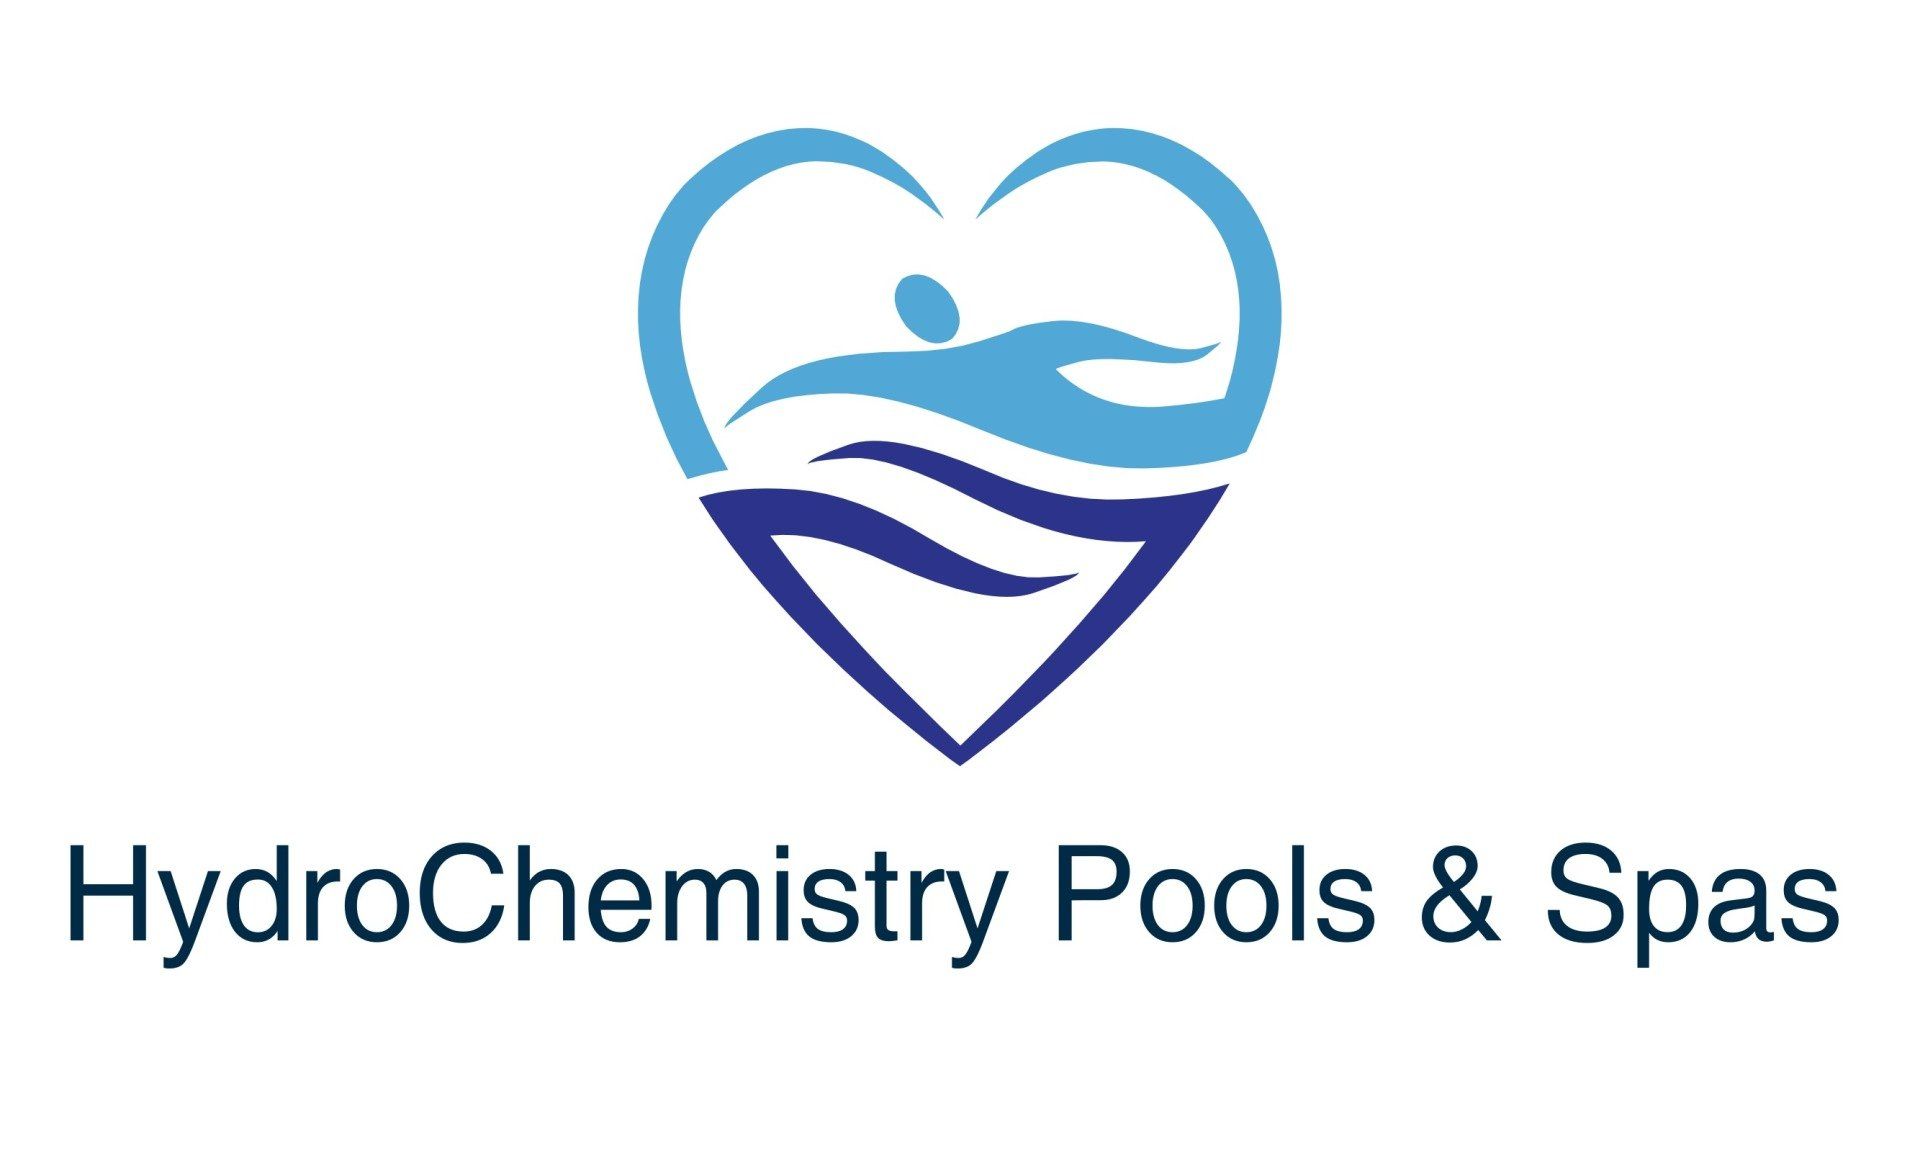 Swimming Pool Cleaning in Greensboro, NC | HydroChemistry Pools & Spas